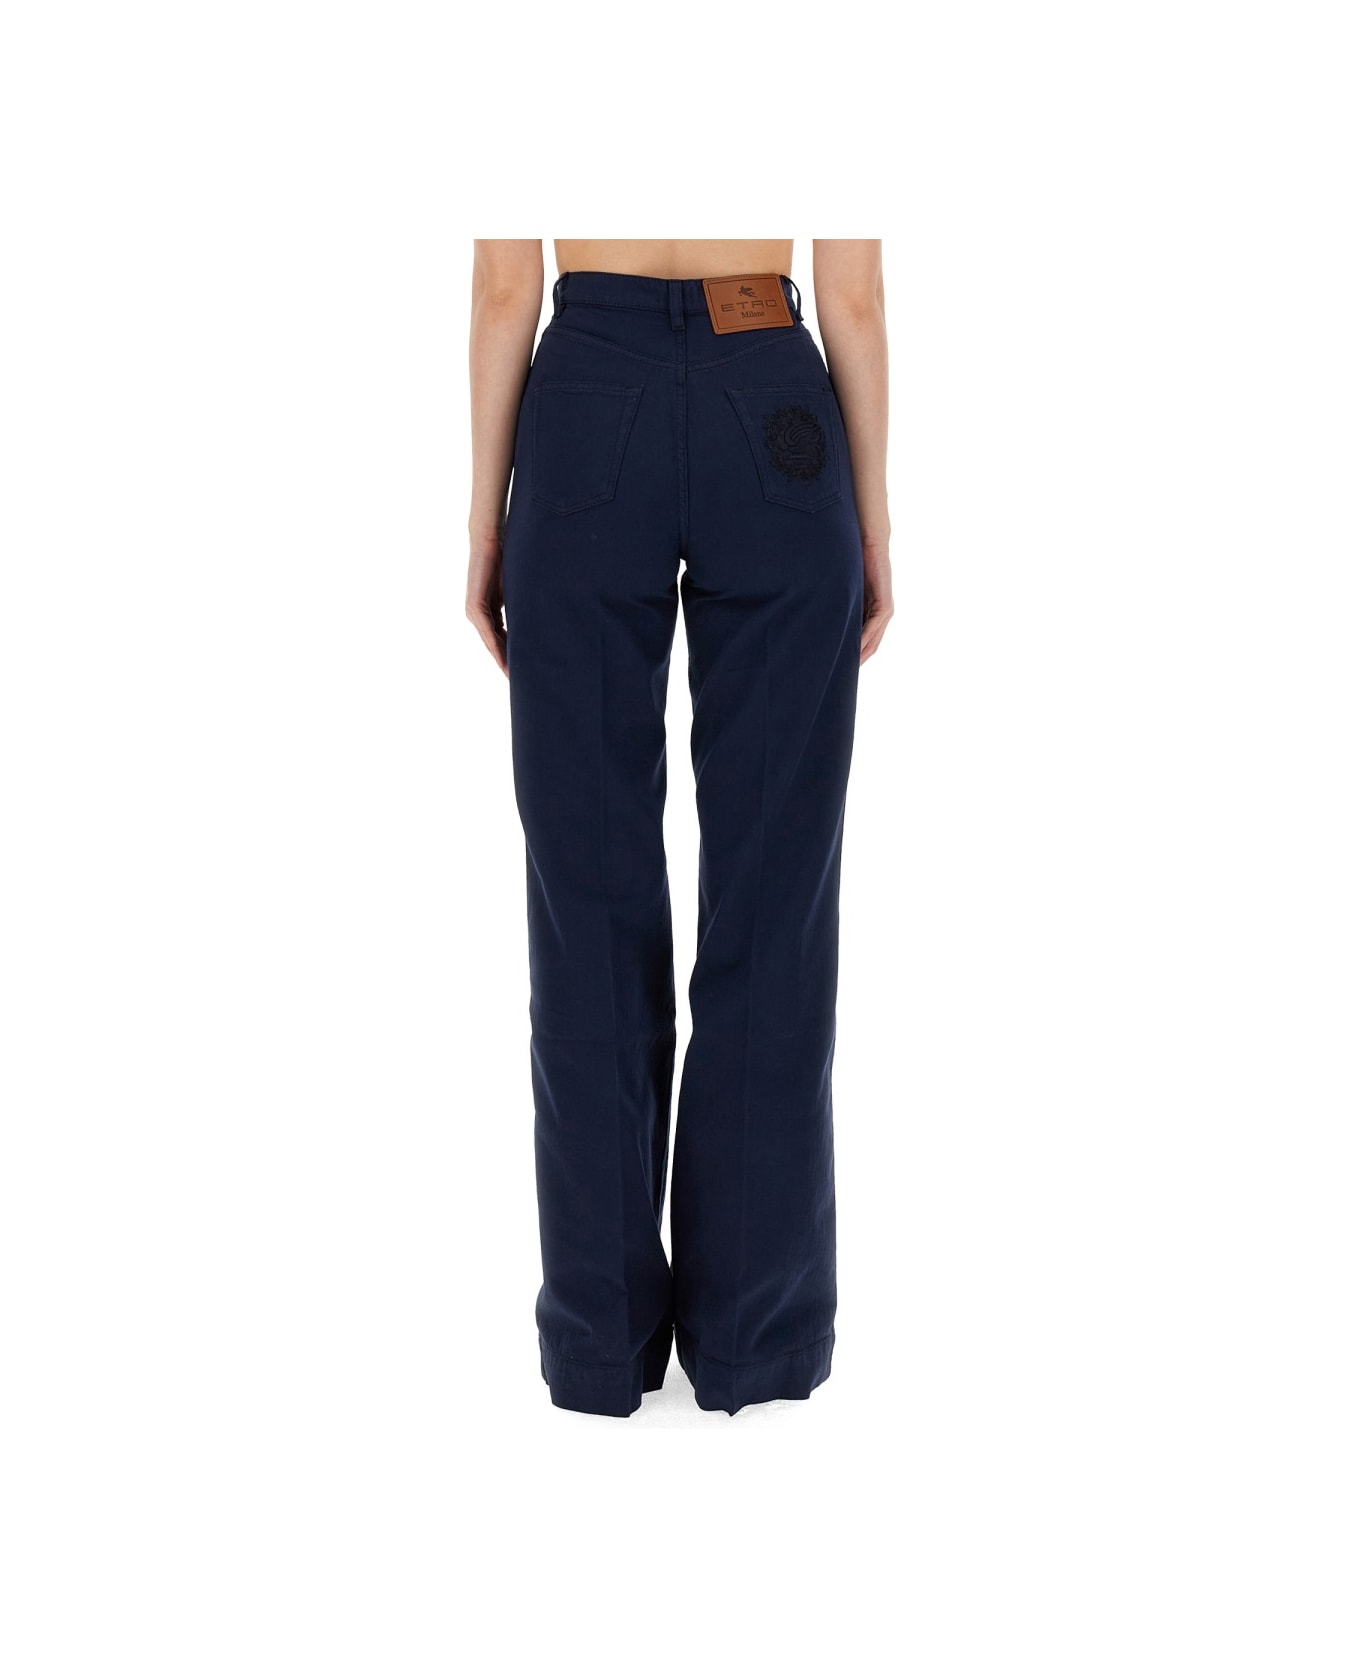 Etro Flare Fit Jeans - BLUE